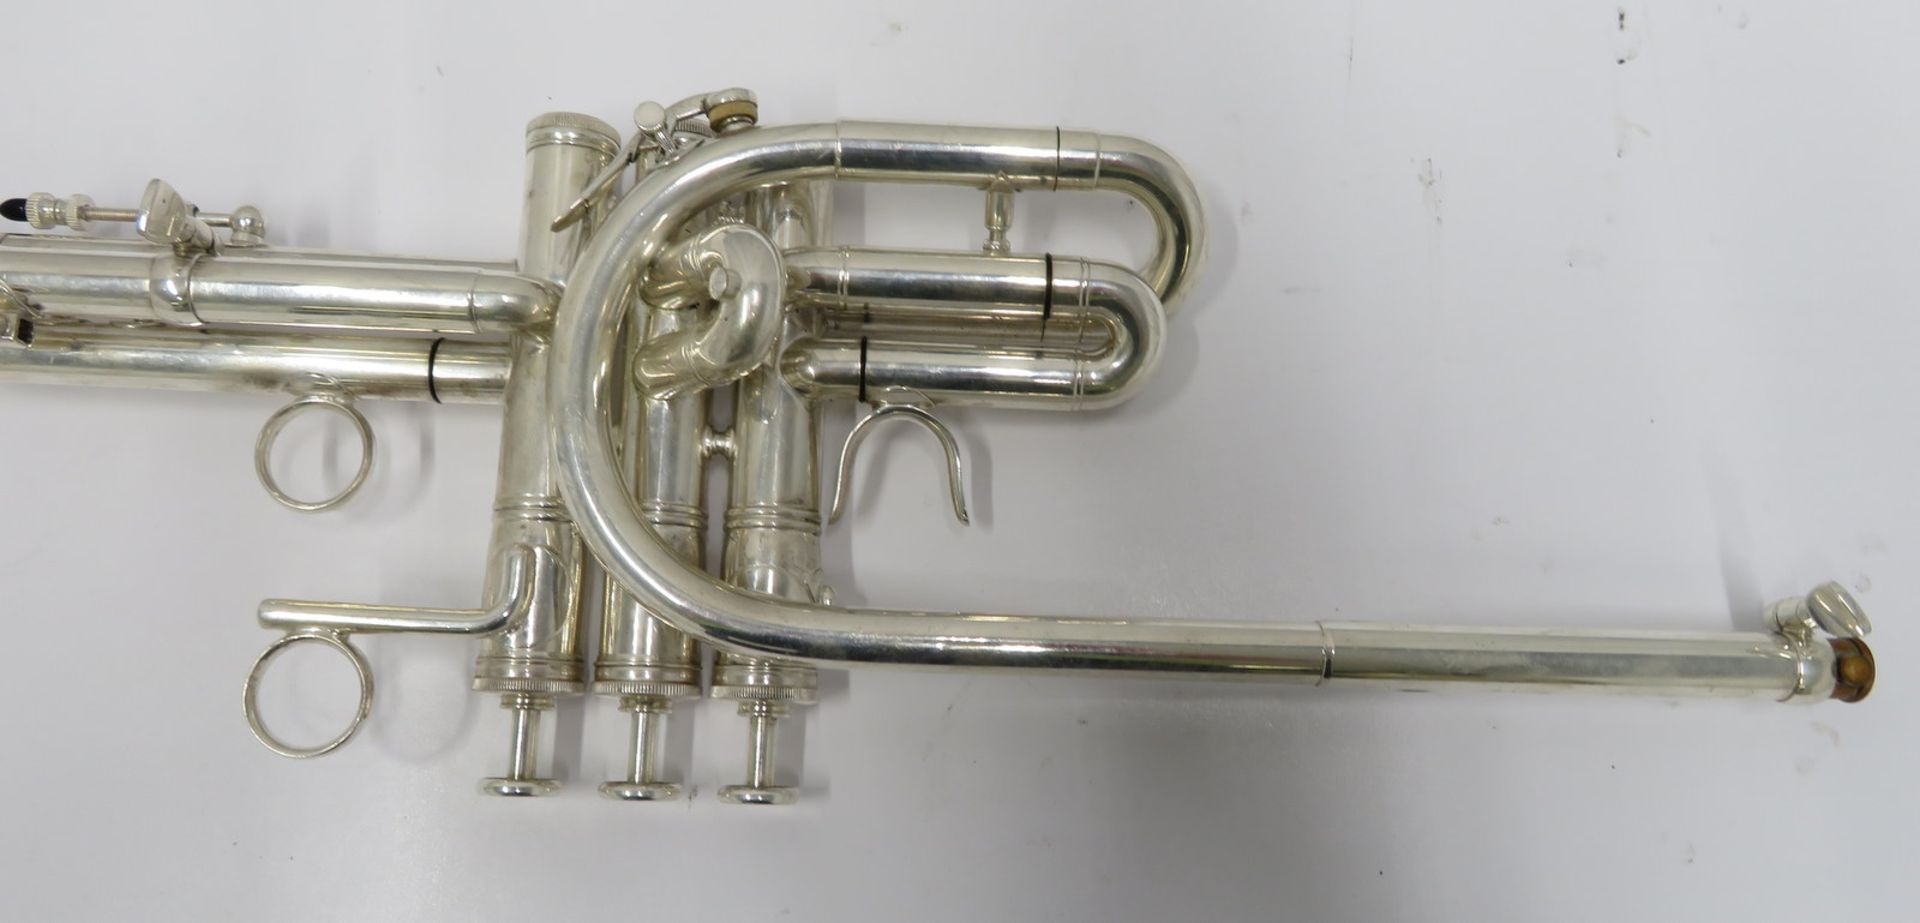 Smith-Watkins fanfare trumpet with case. Serial number: 787. - Image 13 of 14